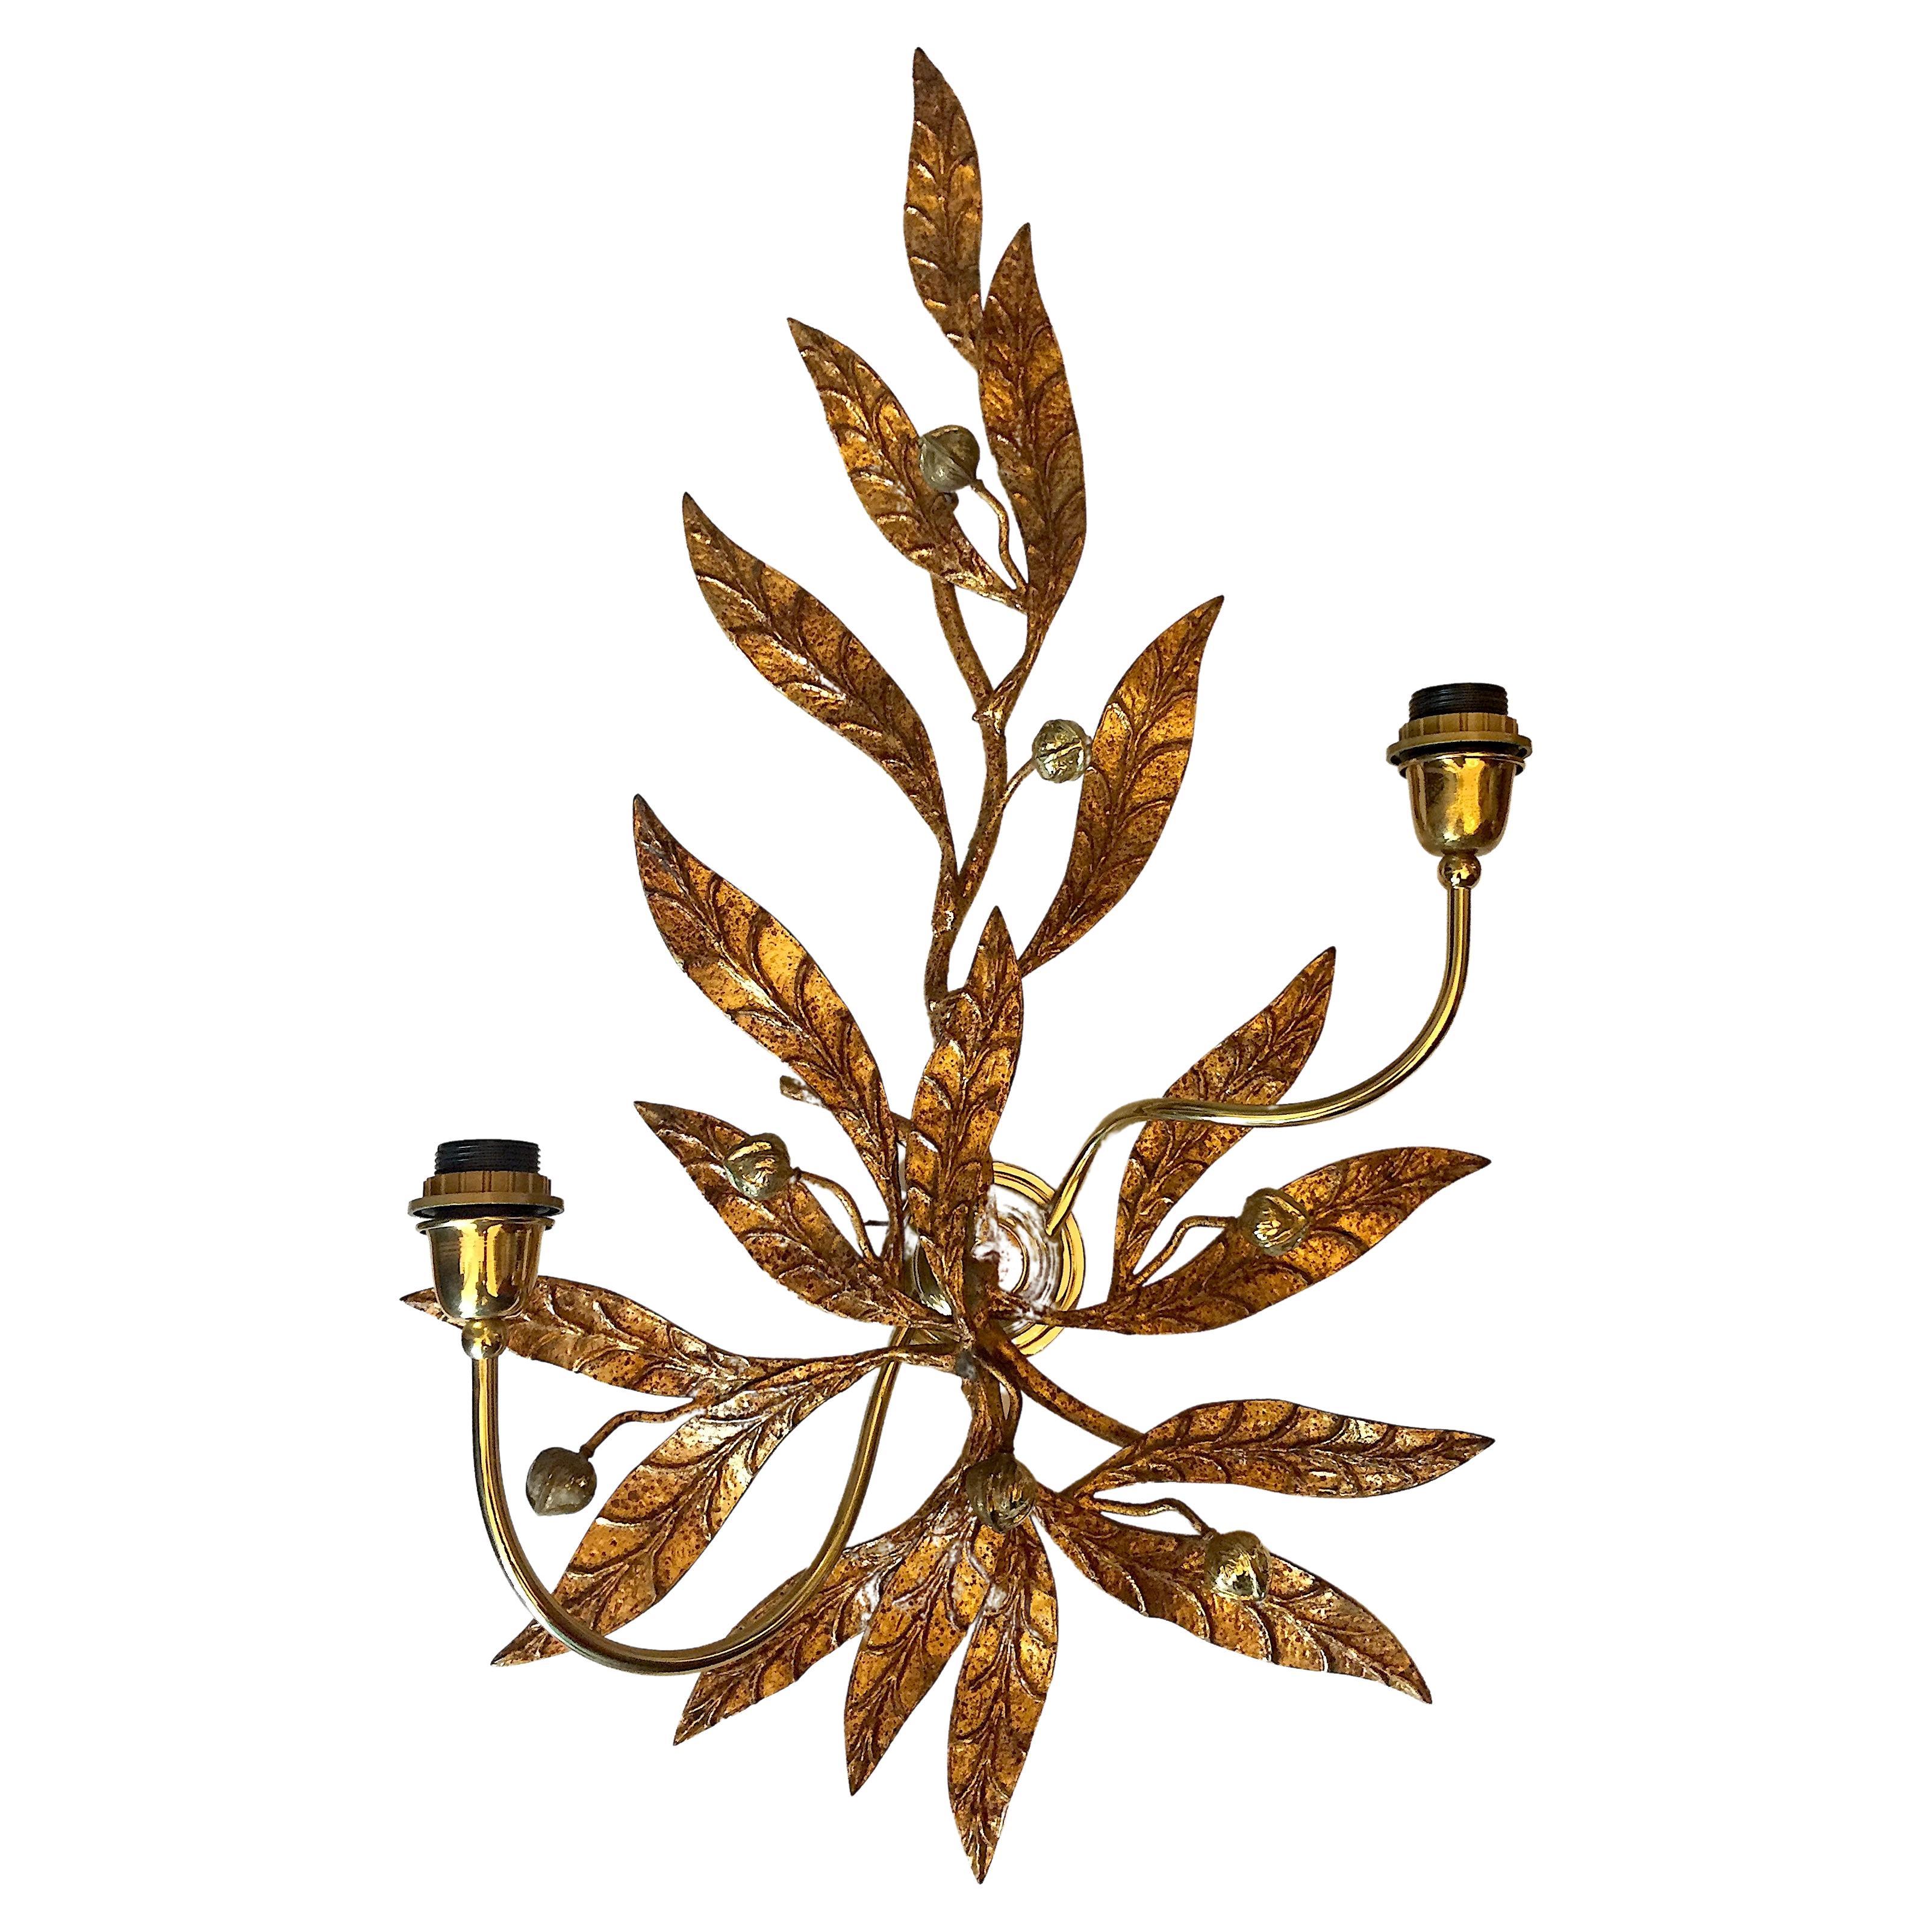 20th Century Italian Gilt Iron Leafed Sconce Monumental Two-light Wall Lamp For Sale